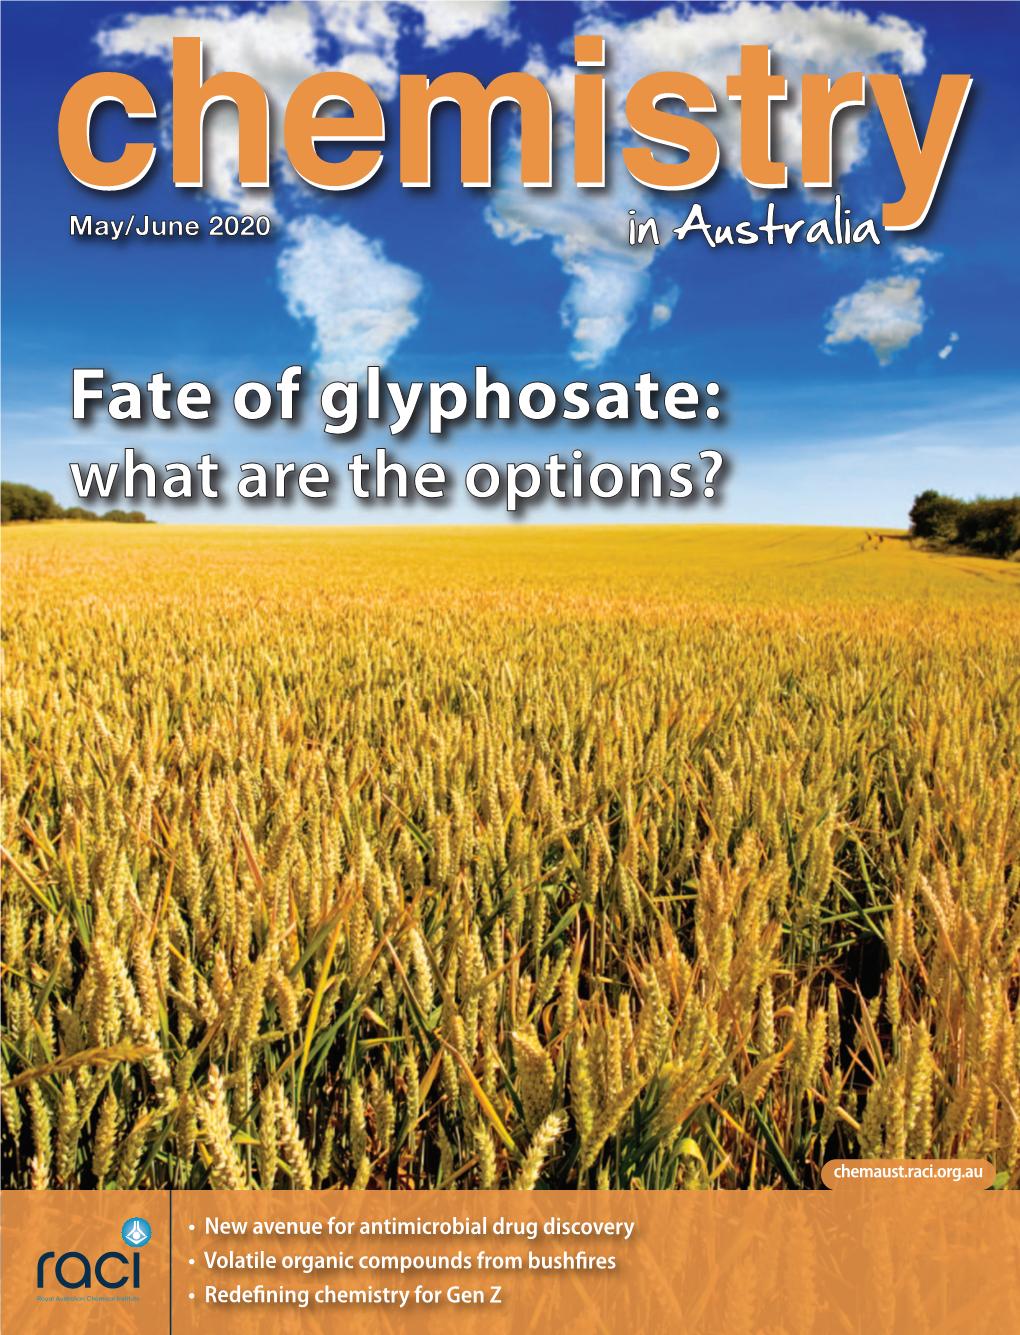 Fate of Glyphosate: What Are the Options?